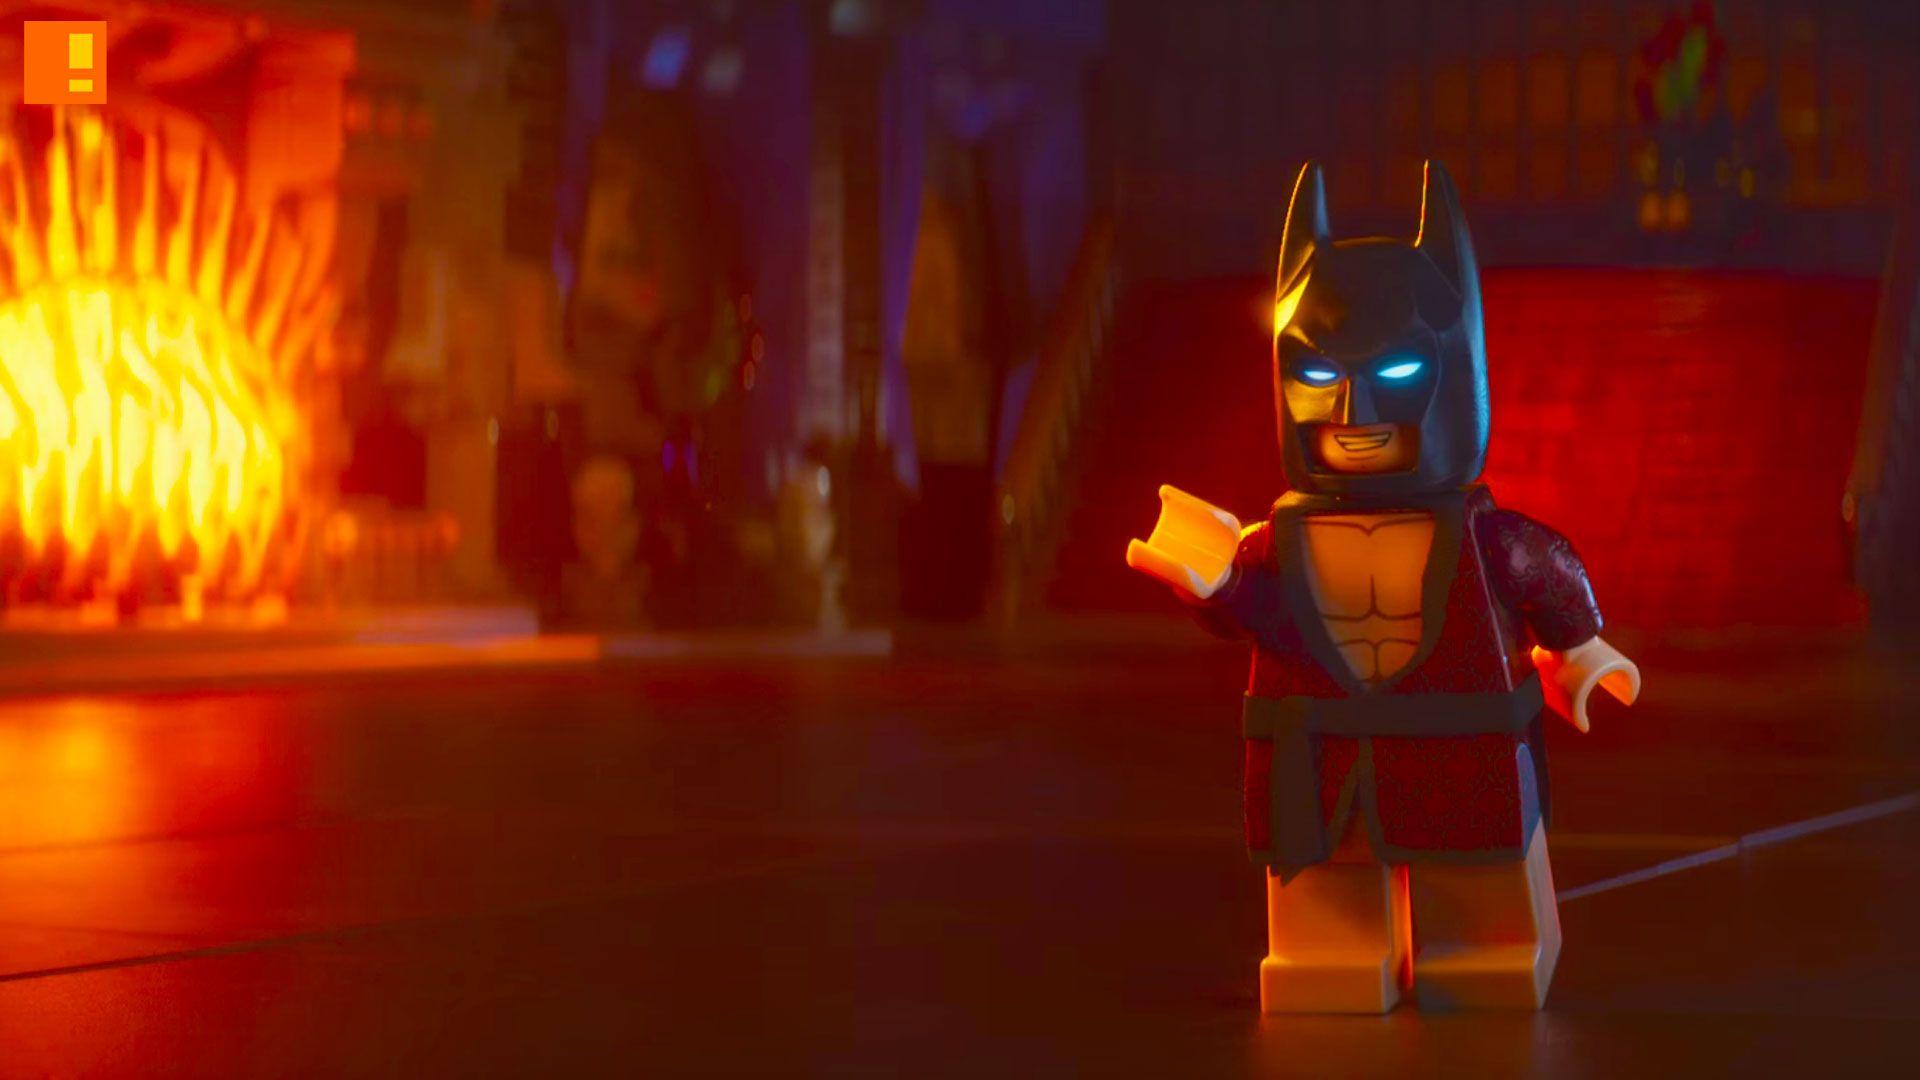 The LEGO Batman Movie” trailer 2 released. The Action Pixel